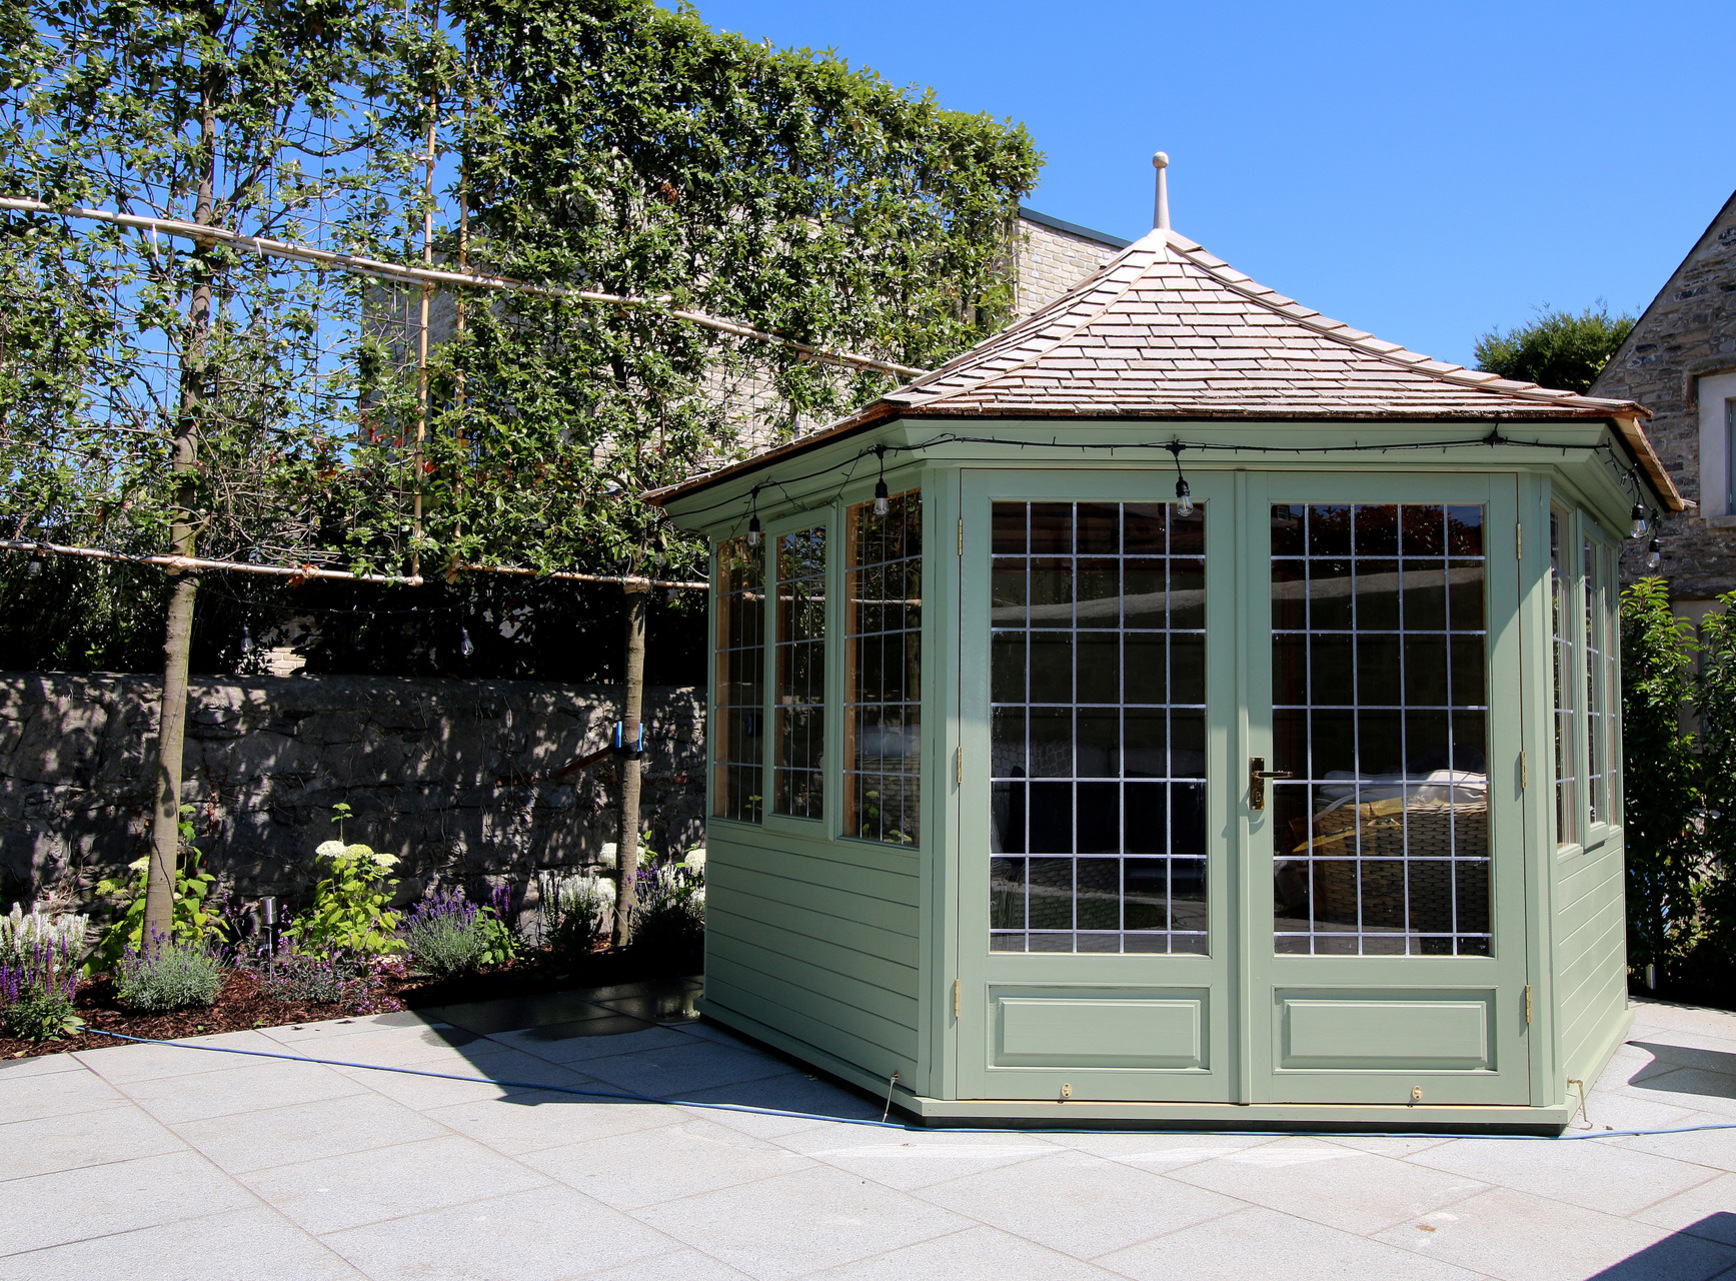 Stunning Victorian Garden Summerhouse, 3.0m diameter, six sided, Western Red Cedar with painted finish |  Supplied + Fitted in Dublin 6, by Owen Chubb Garden Landscapes Limited. Tel 087-2306 128